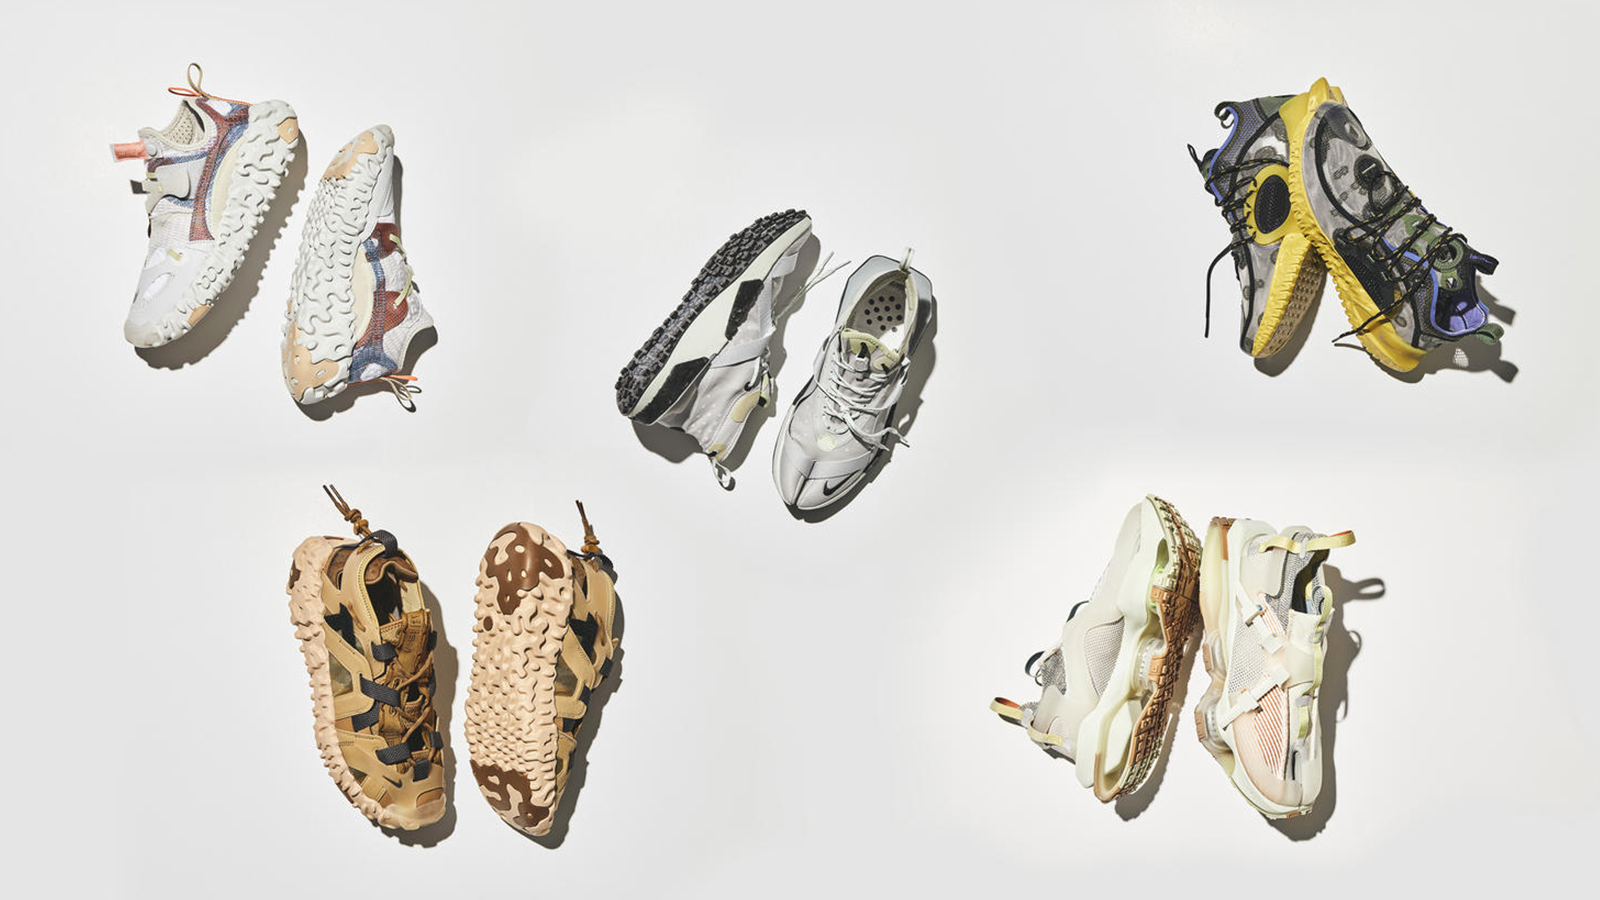 Nike ISPA 2020 Sneaker Collection